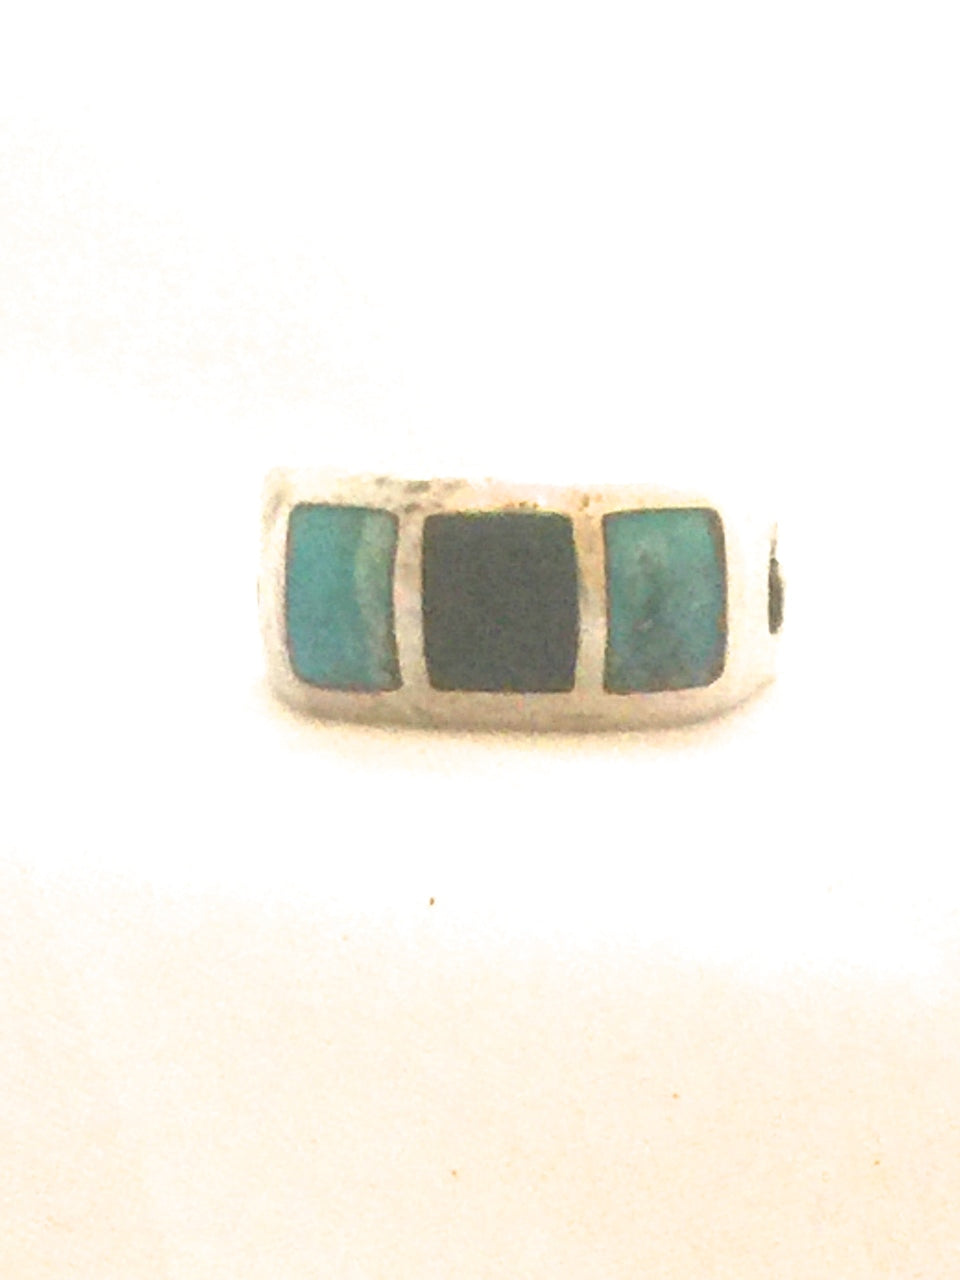 Vintage Sterling Silver Southwest Tribal Ring  Band Onyx & Turquoise   Size 9   7.7g